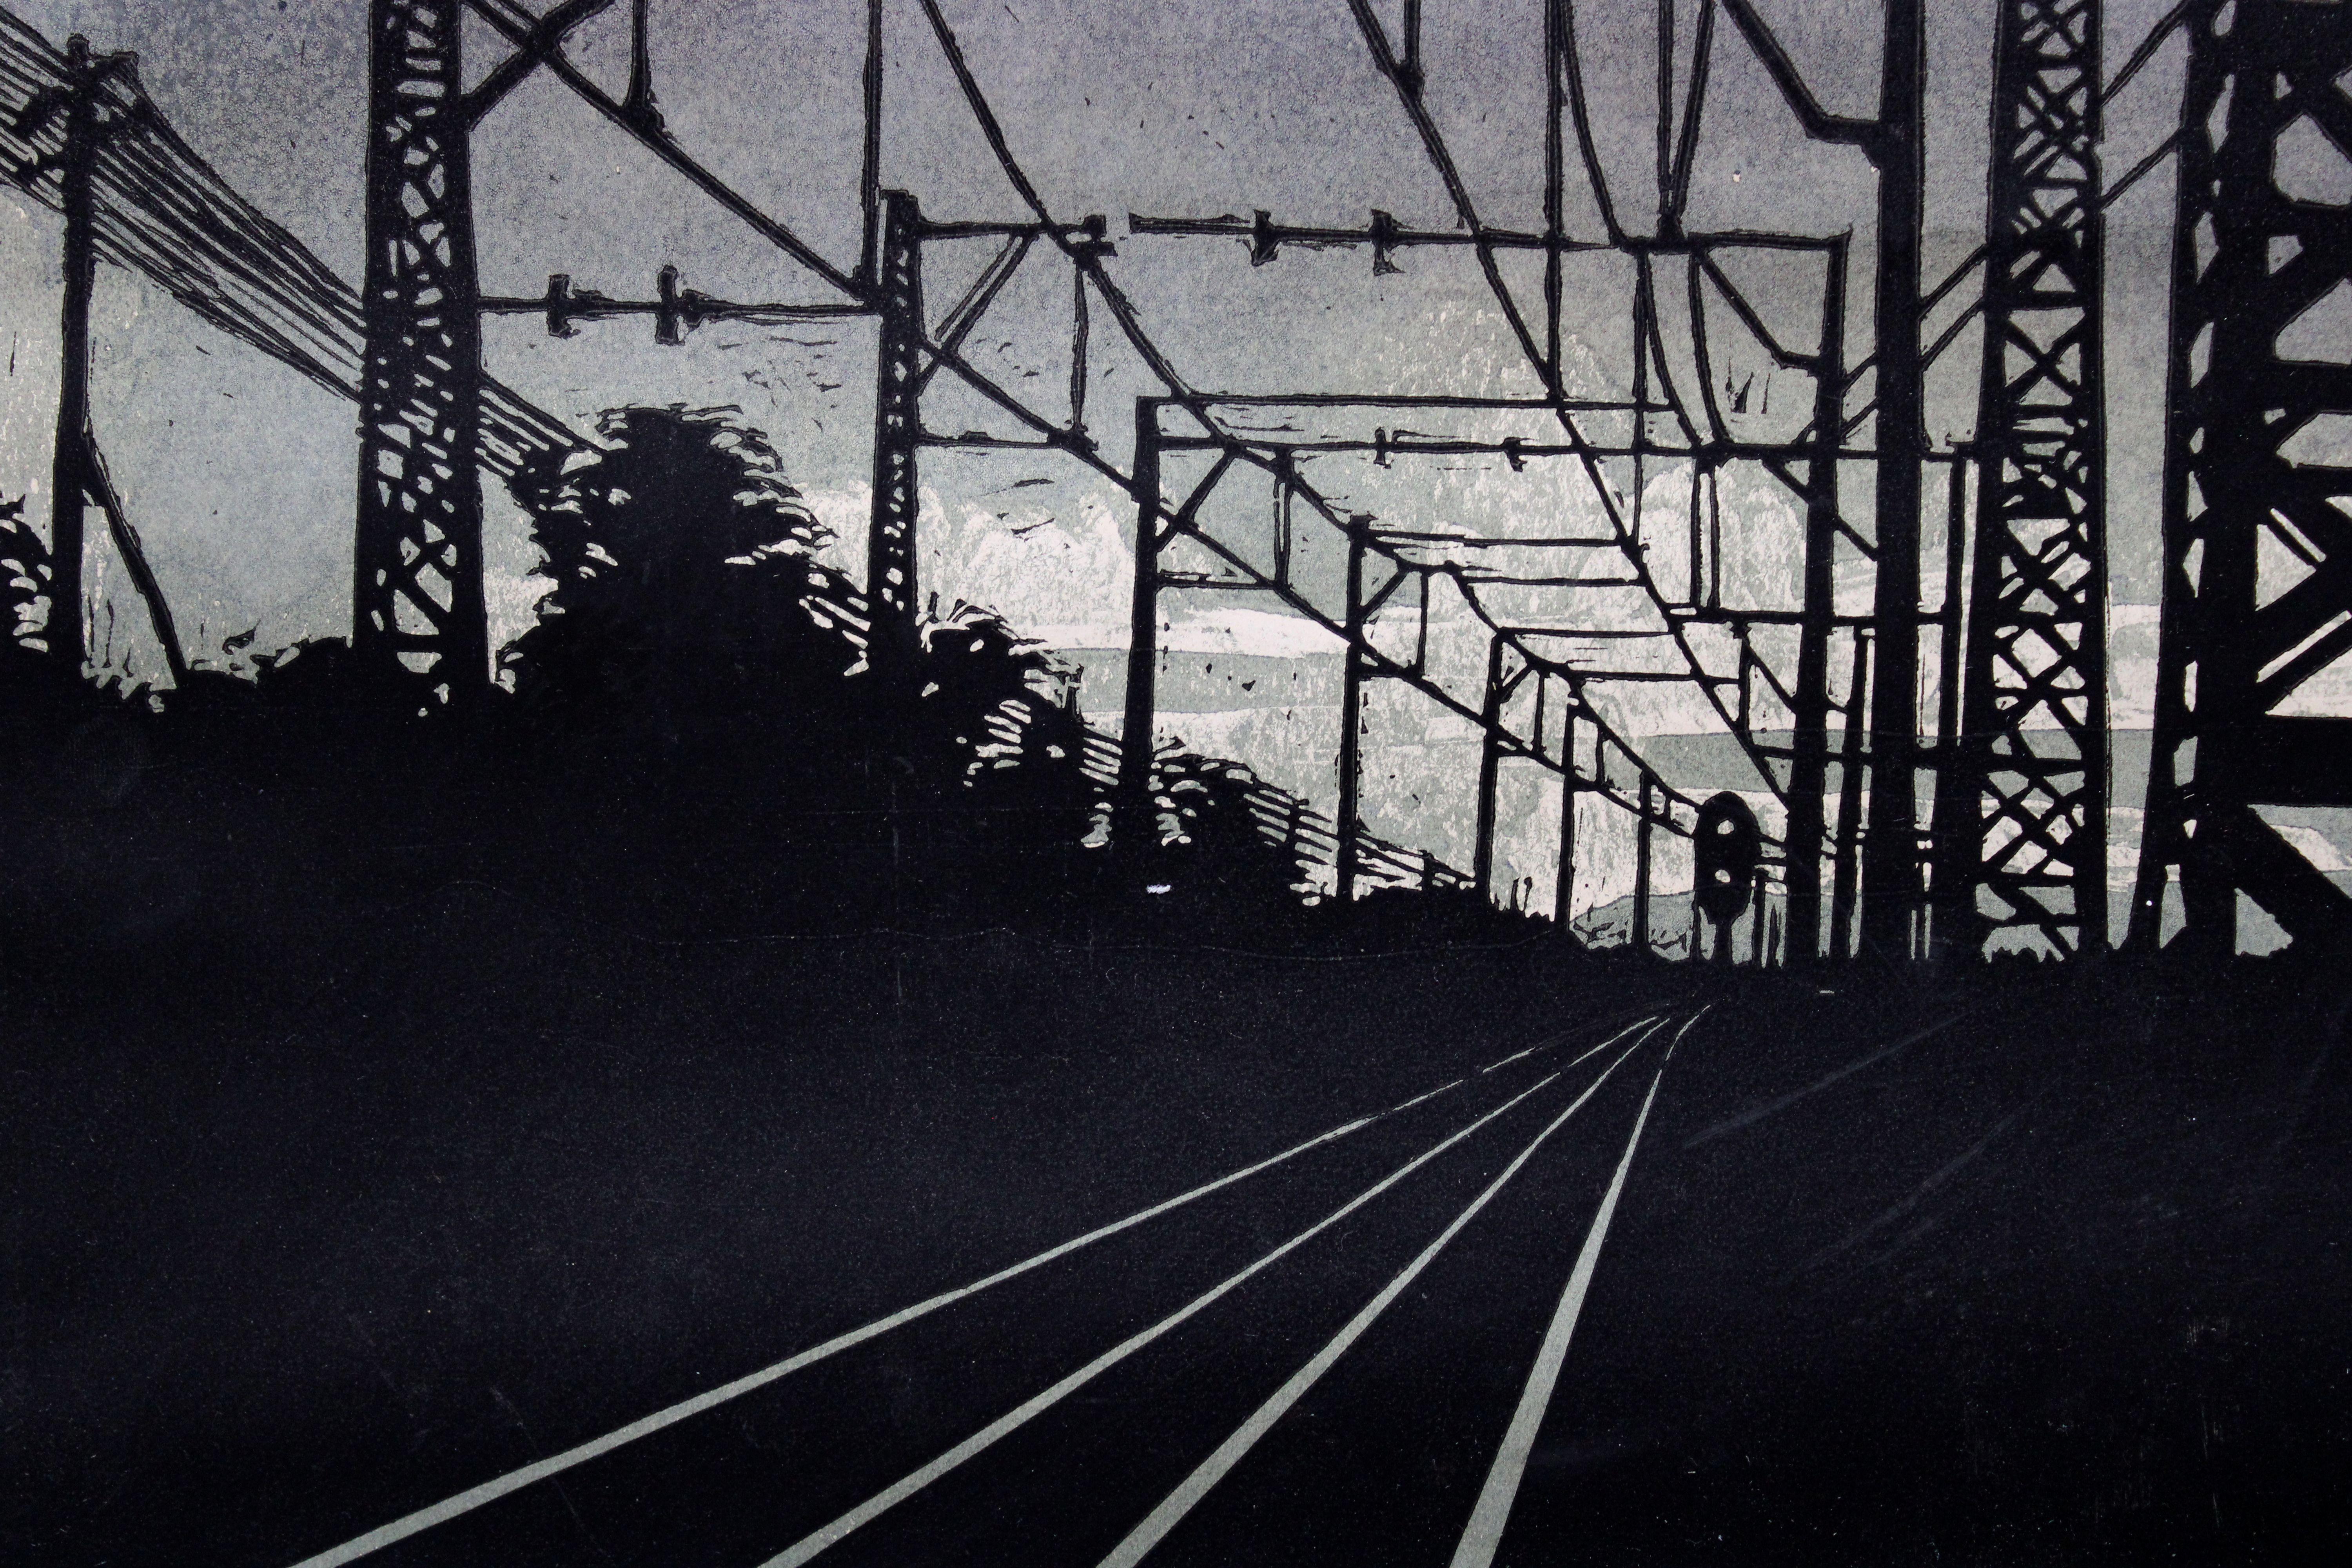 At Jurmala

1960, 1/10, paper, linocut, 45x37 cm

The artwork depicts a railway setting, specifically at Jurmala, during the evening hours. The dark-toned nature of the composition suggests a subdued or moody atmosphere. 

The linocut technique